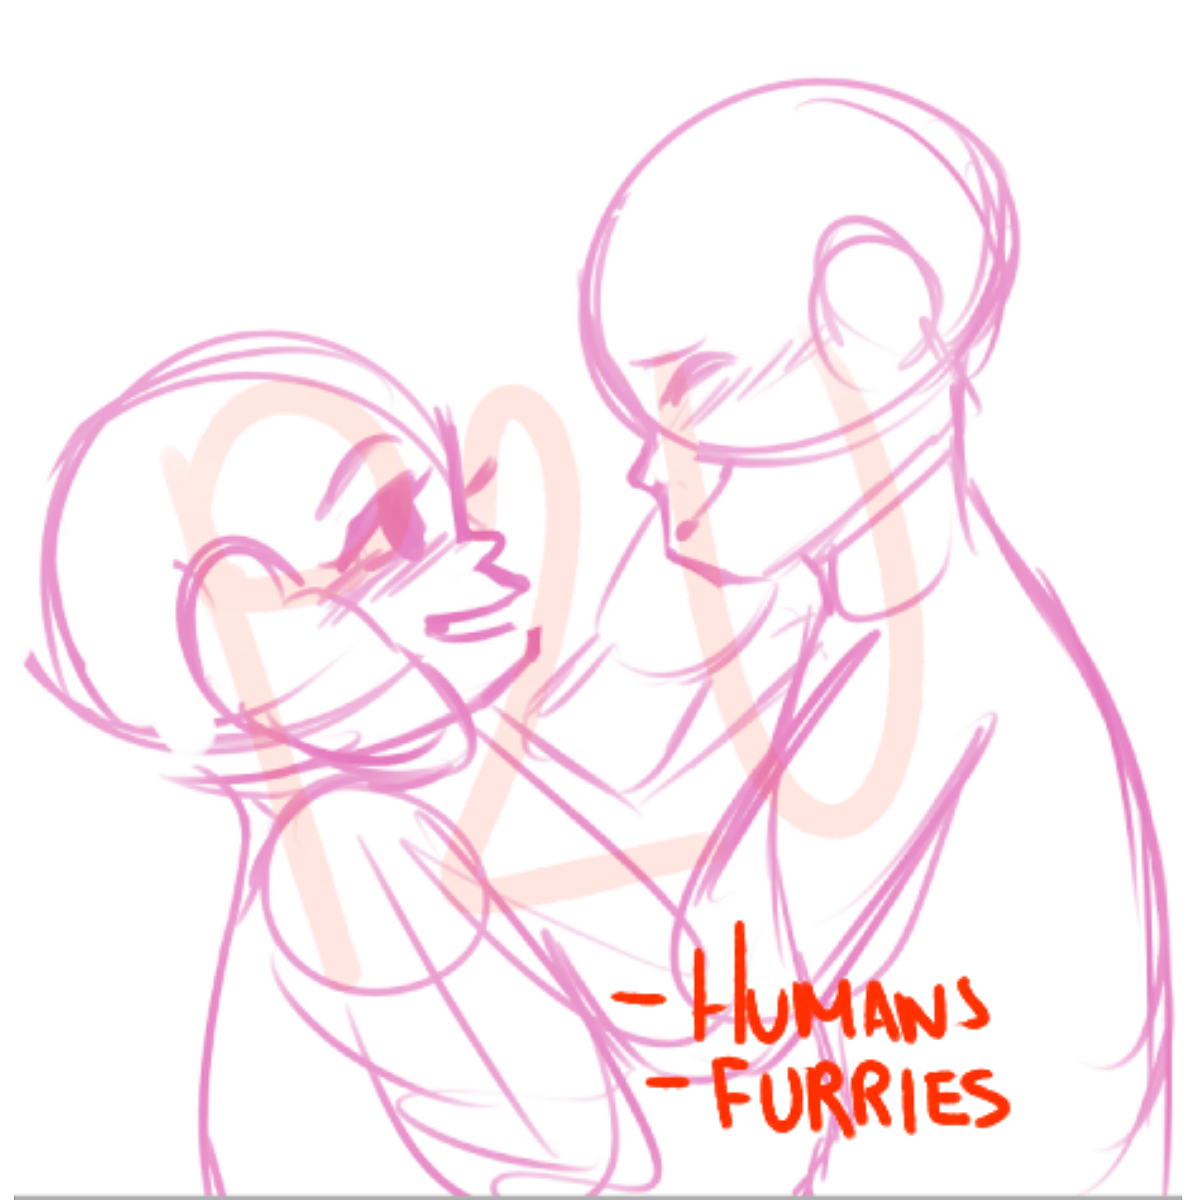 Ych Couple Cartoon Furry And Human Ych Commishes verse 2 trying not to go off the deep end think you wanna give me a reason i've been trying not to go off the deep end i don't think you wanna give mе me. ych couple cartoon furry and human